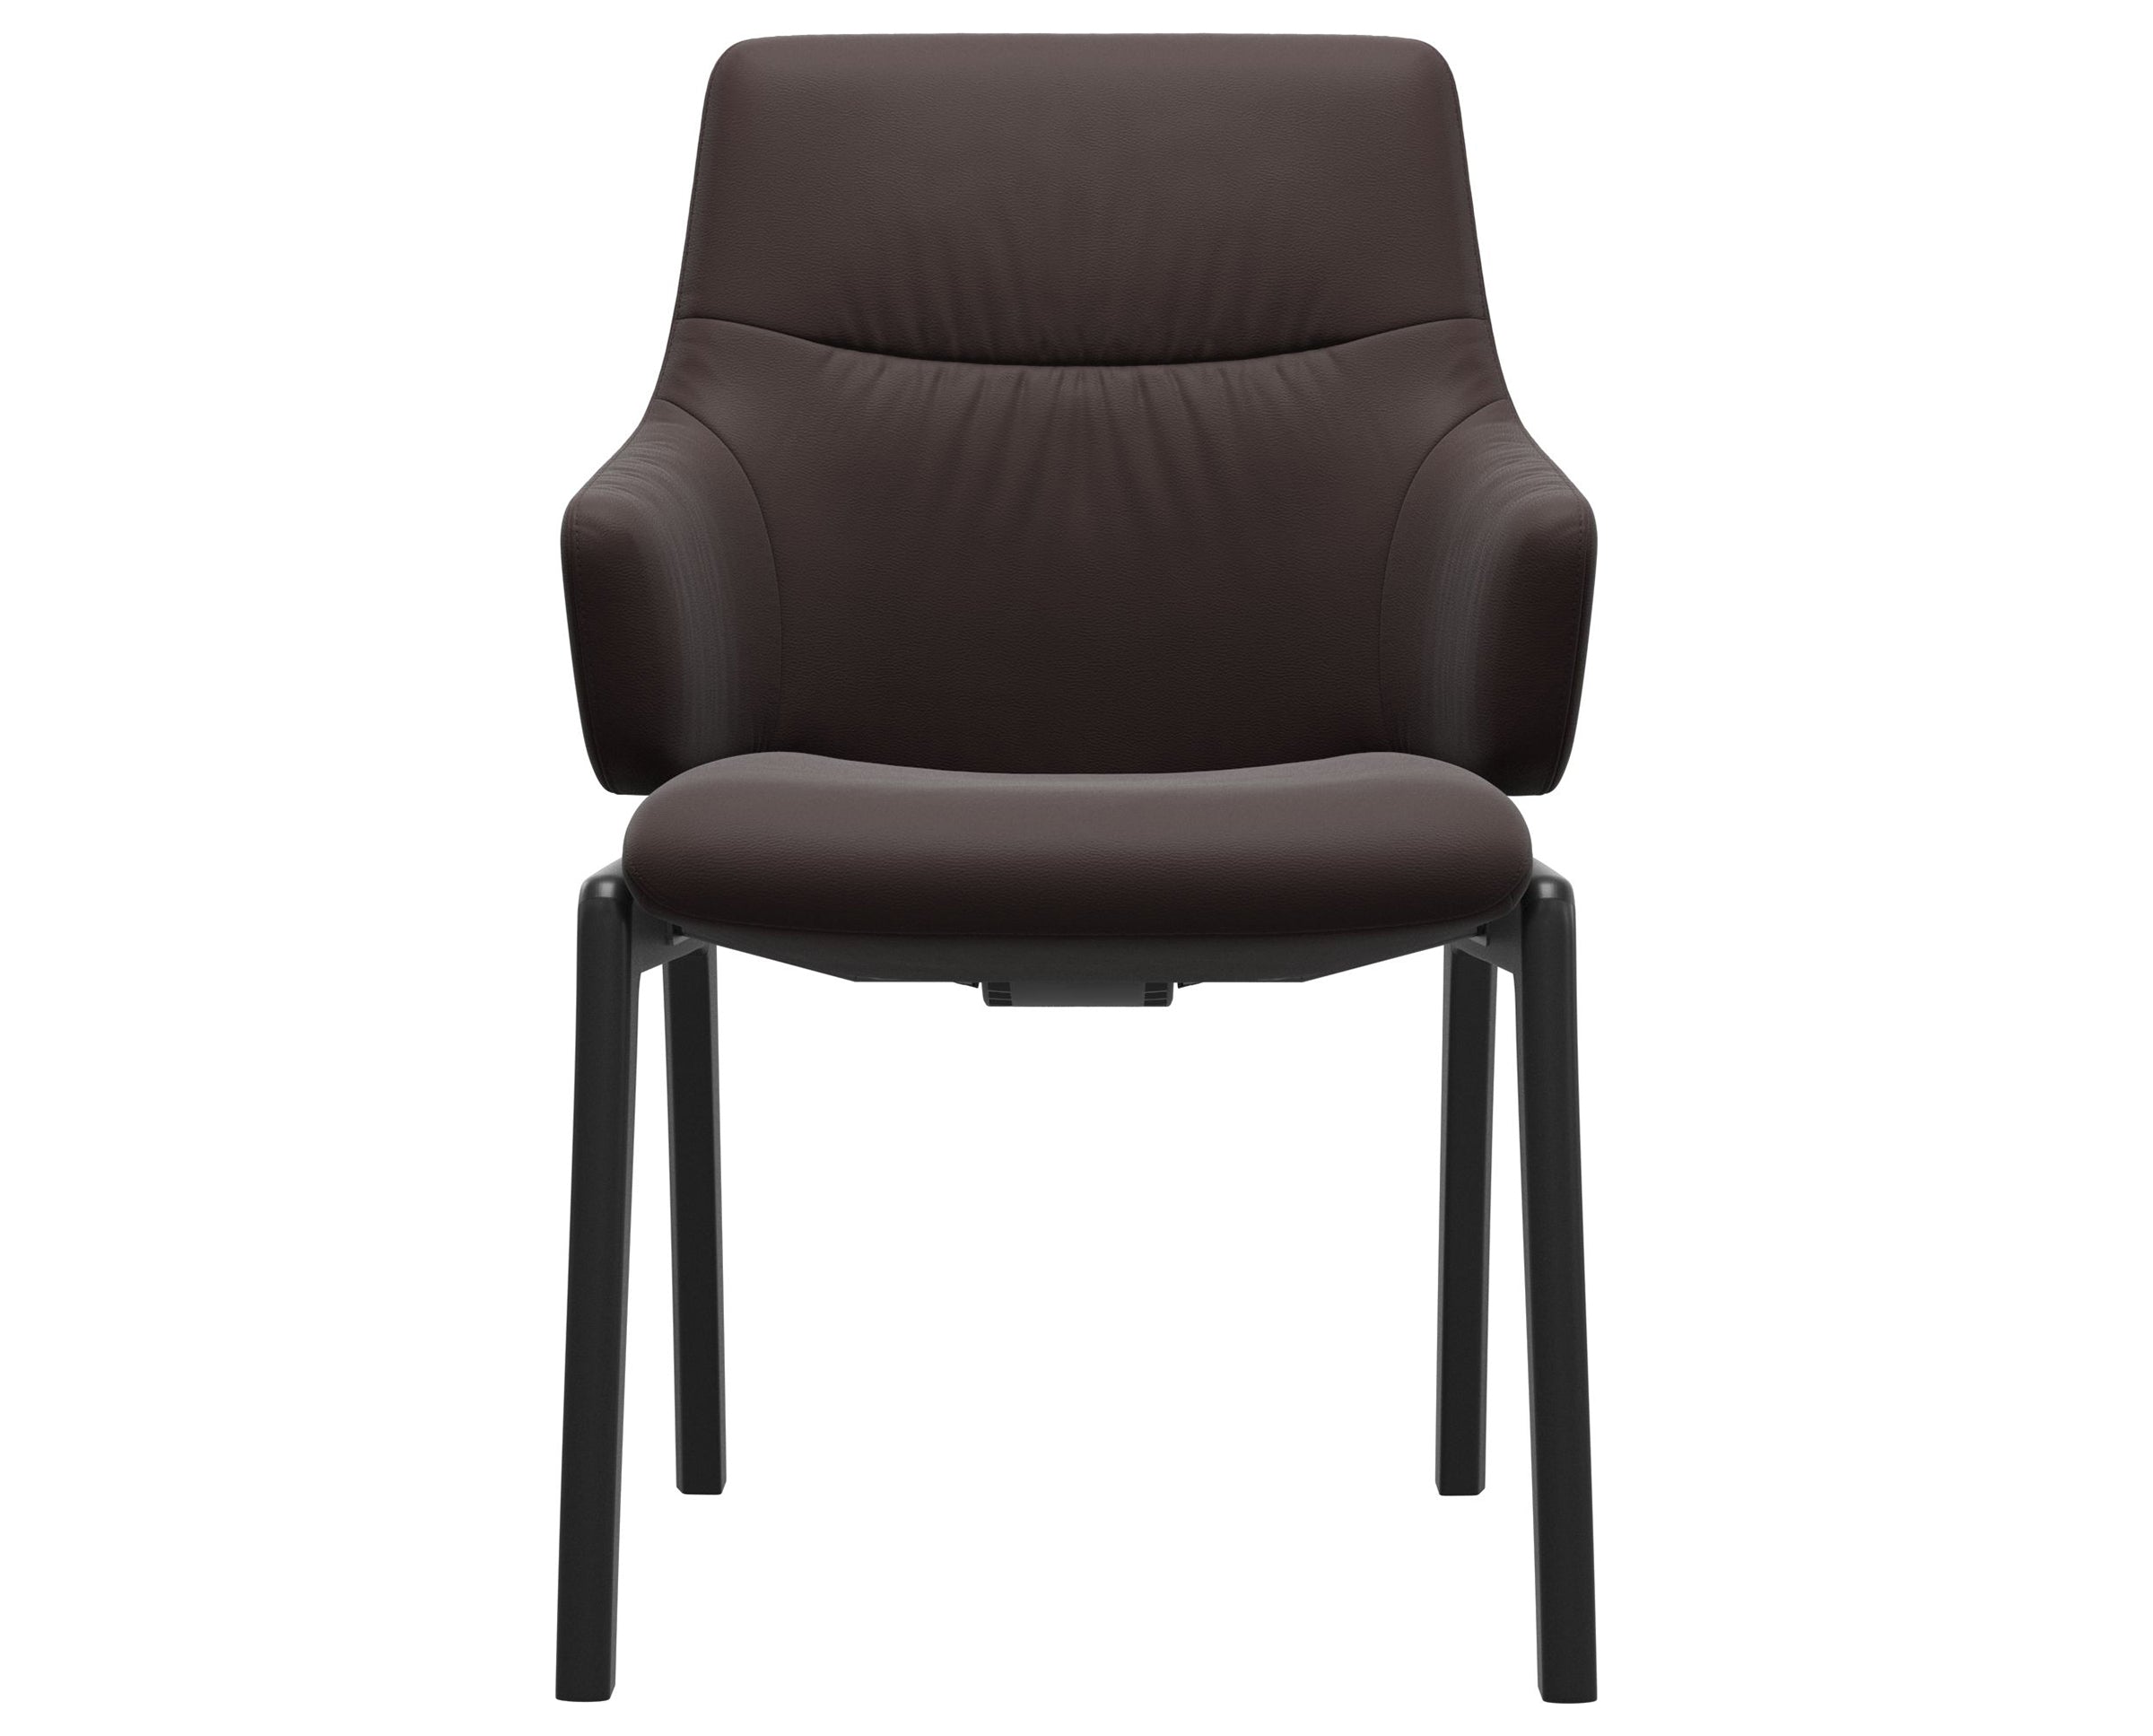 Paloma Leather Chocolate and Black Base | Stressless Mint Low Back D100 Dining Chair w/Arms | Valley Ridge Furniture